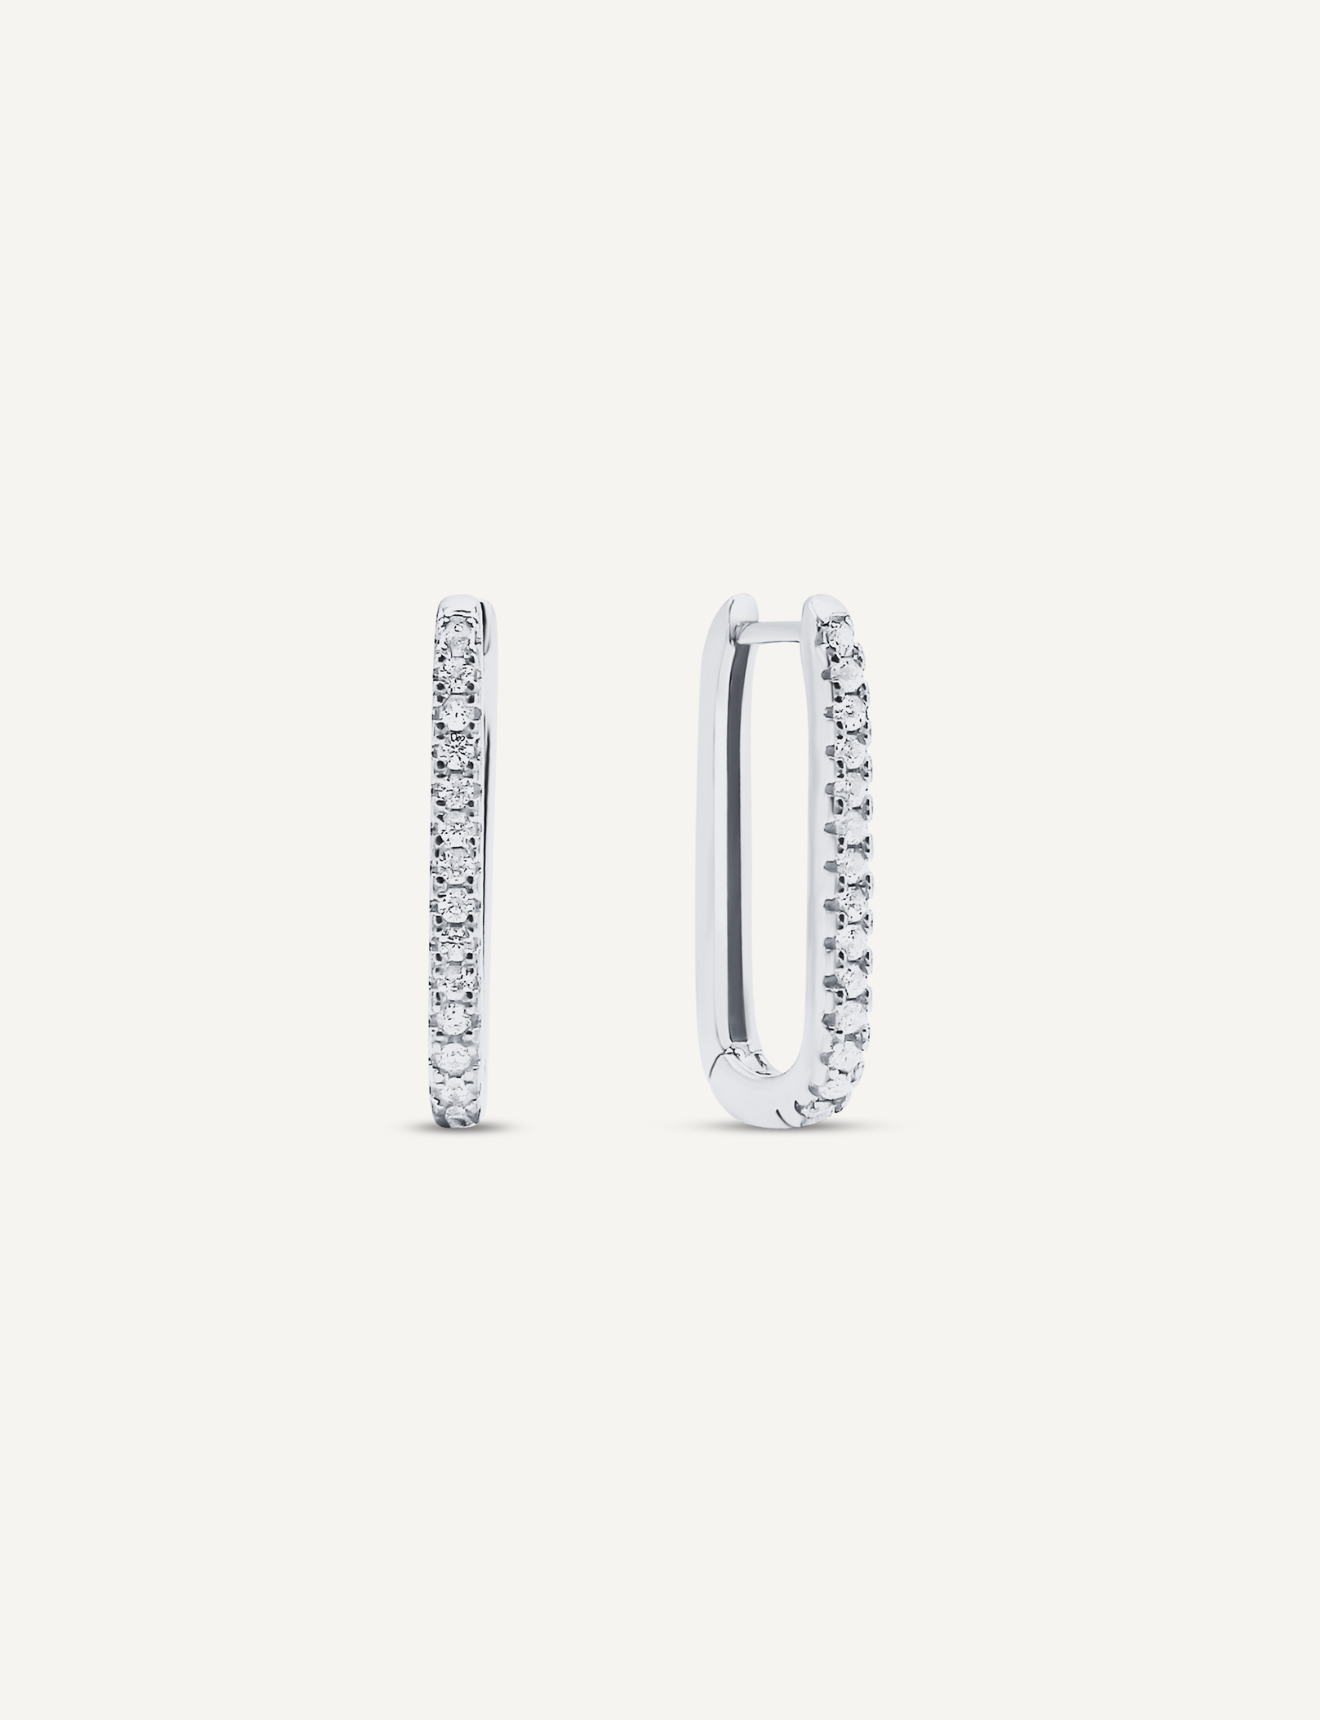 925 Sterling Silver oval shaped hoops that click close with a latch and are studded with small, round clear Cubic Zirconia crystals.